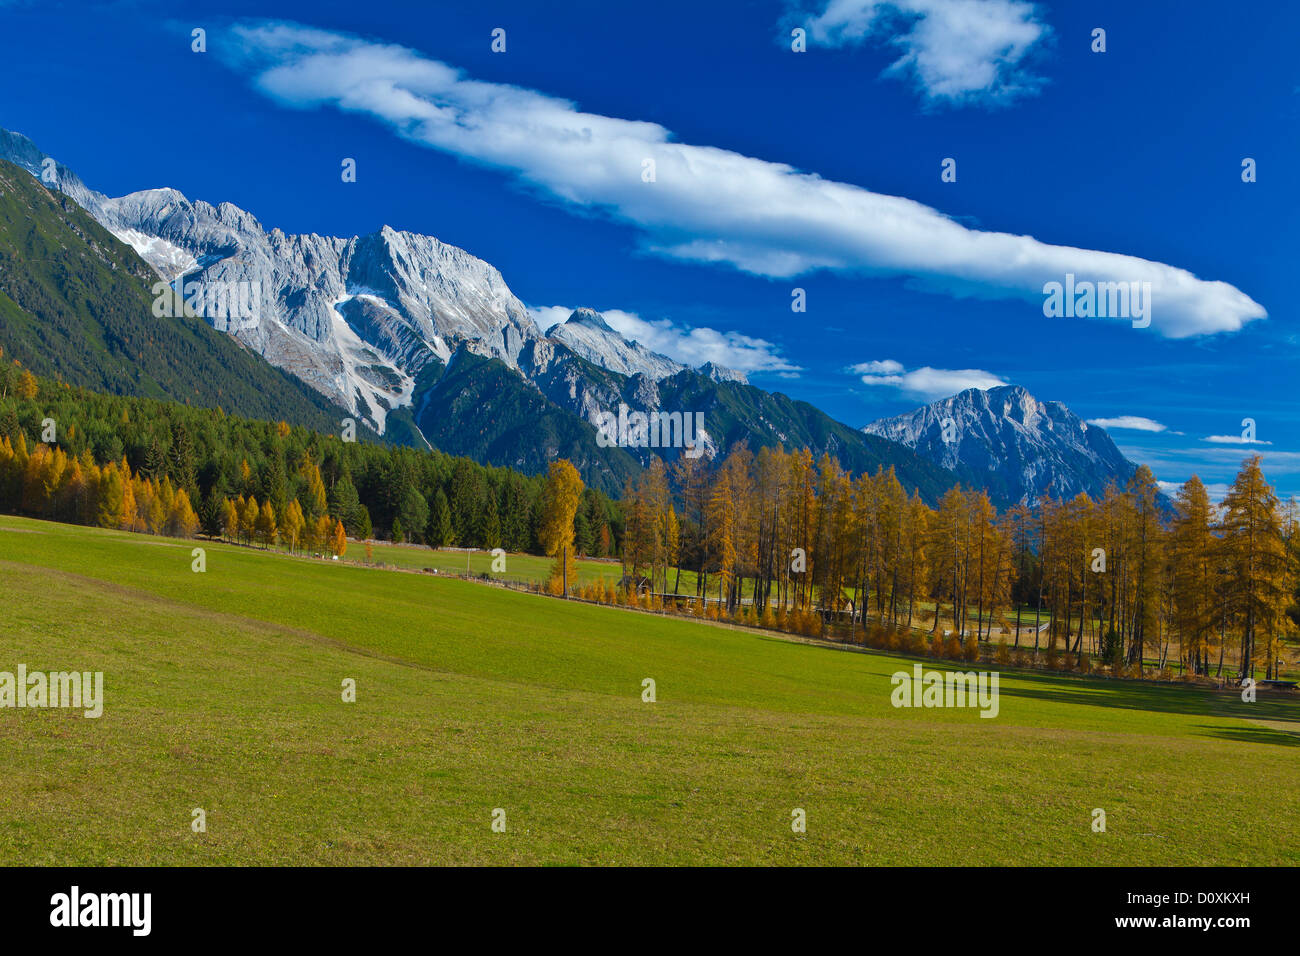 Austria, Europe, Tyrol, Tirol, Mieming, chain, plateau, Obsteig, meadow, wood, forest, larches, spruces, mountains, mountains, M Stock Photo